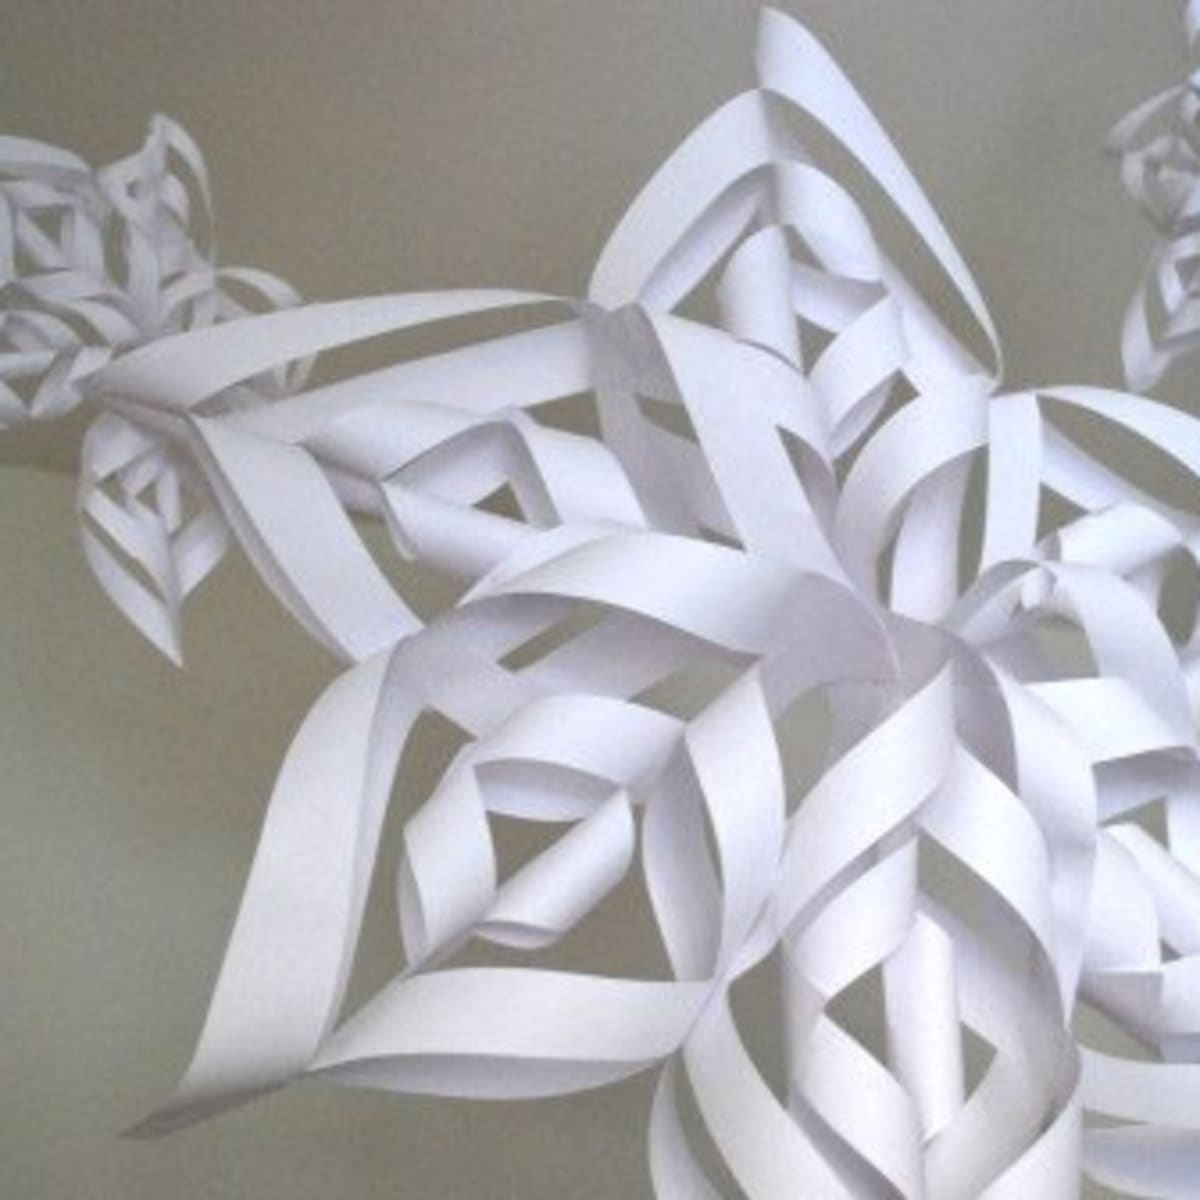 How to Make 3d Snowflakes Out of Paper  3d paper snowflakes, Paper crafts  diy, Paper snowflakes diy